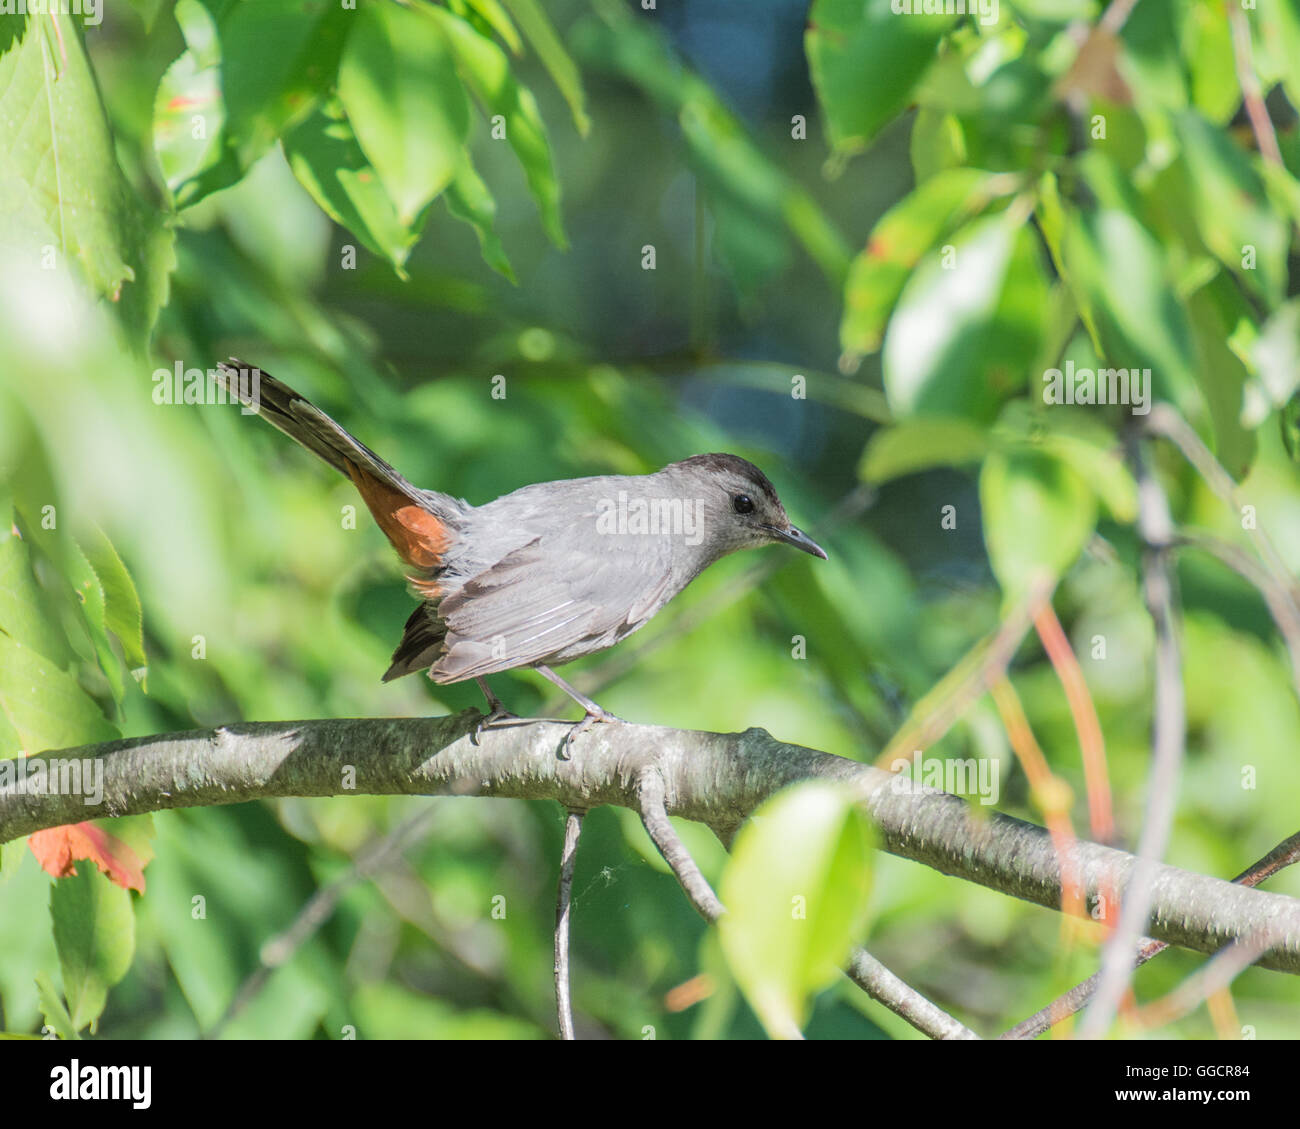 A Catbird perched on a tree branch. Stock Photo